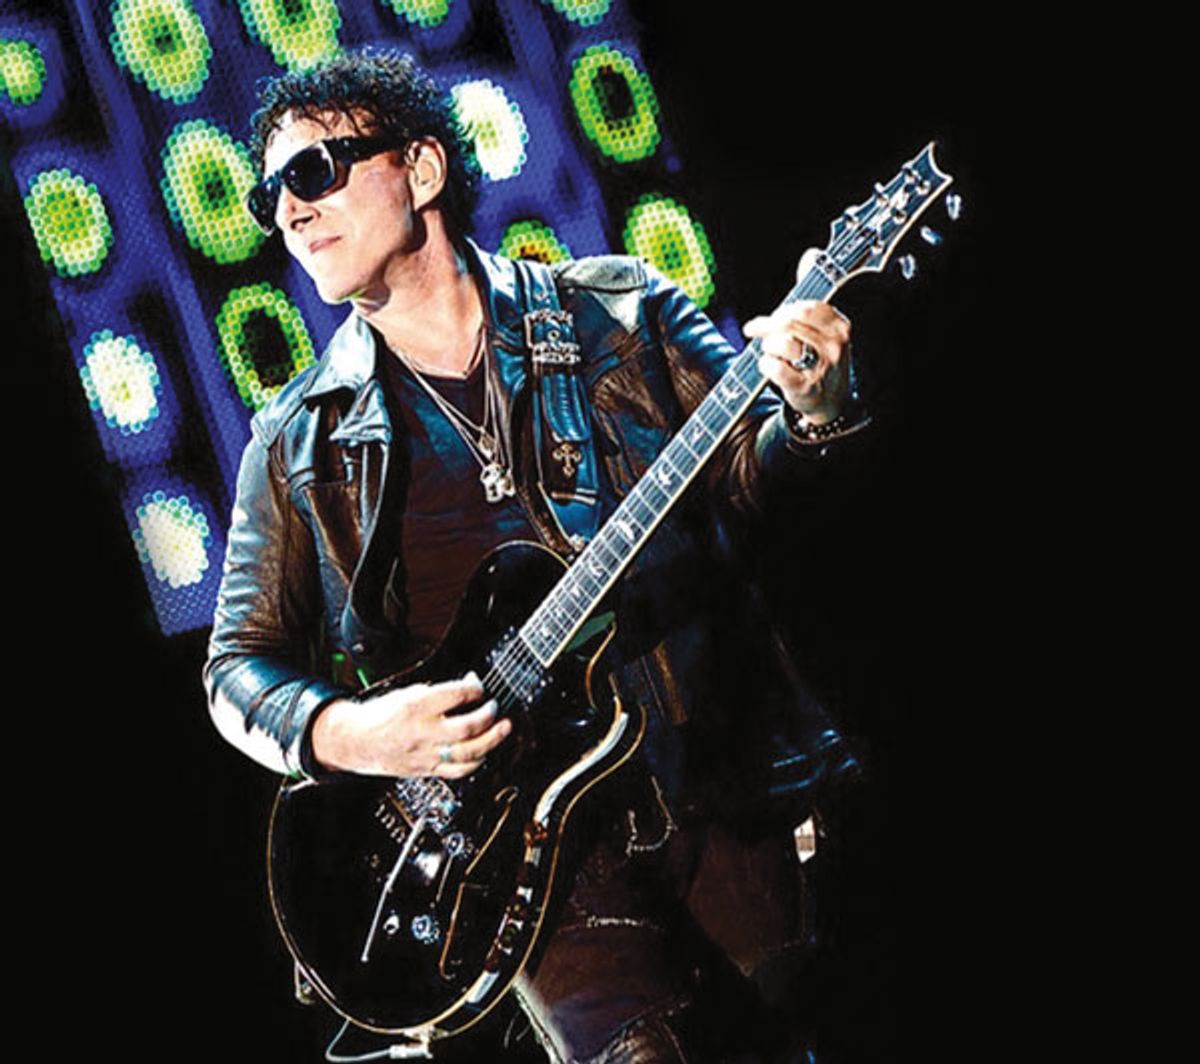 Neal Schon: “Lady M (Our Love Remains)” Song Premiere